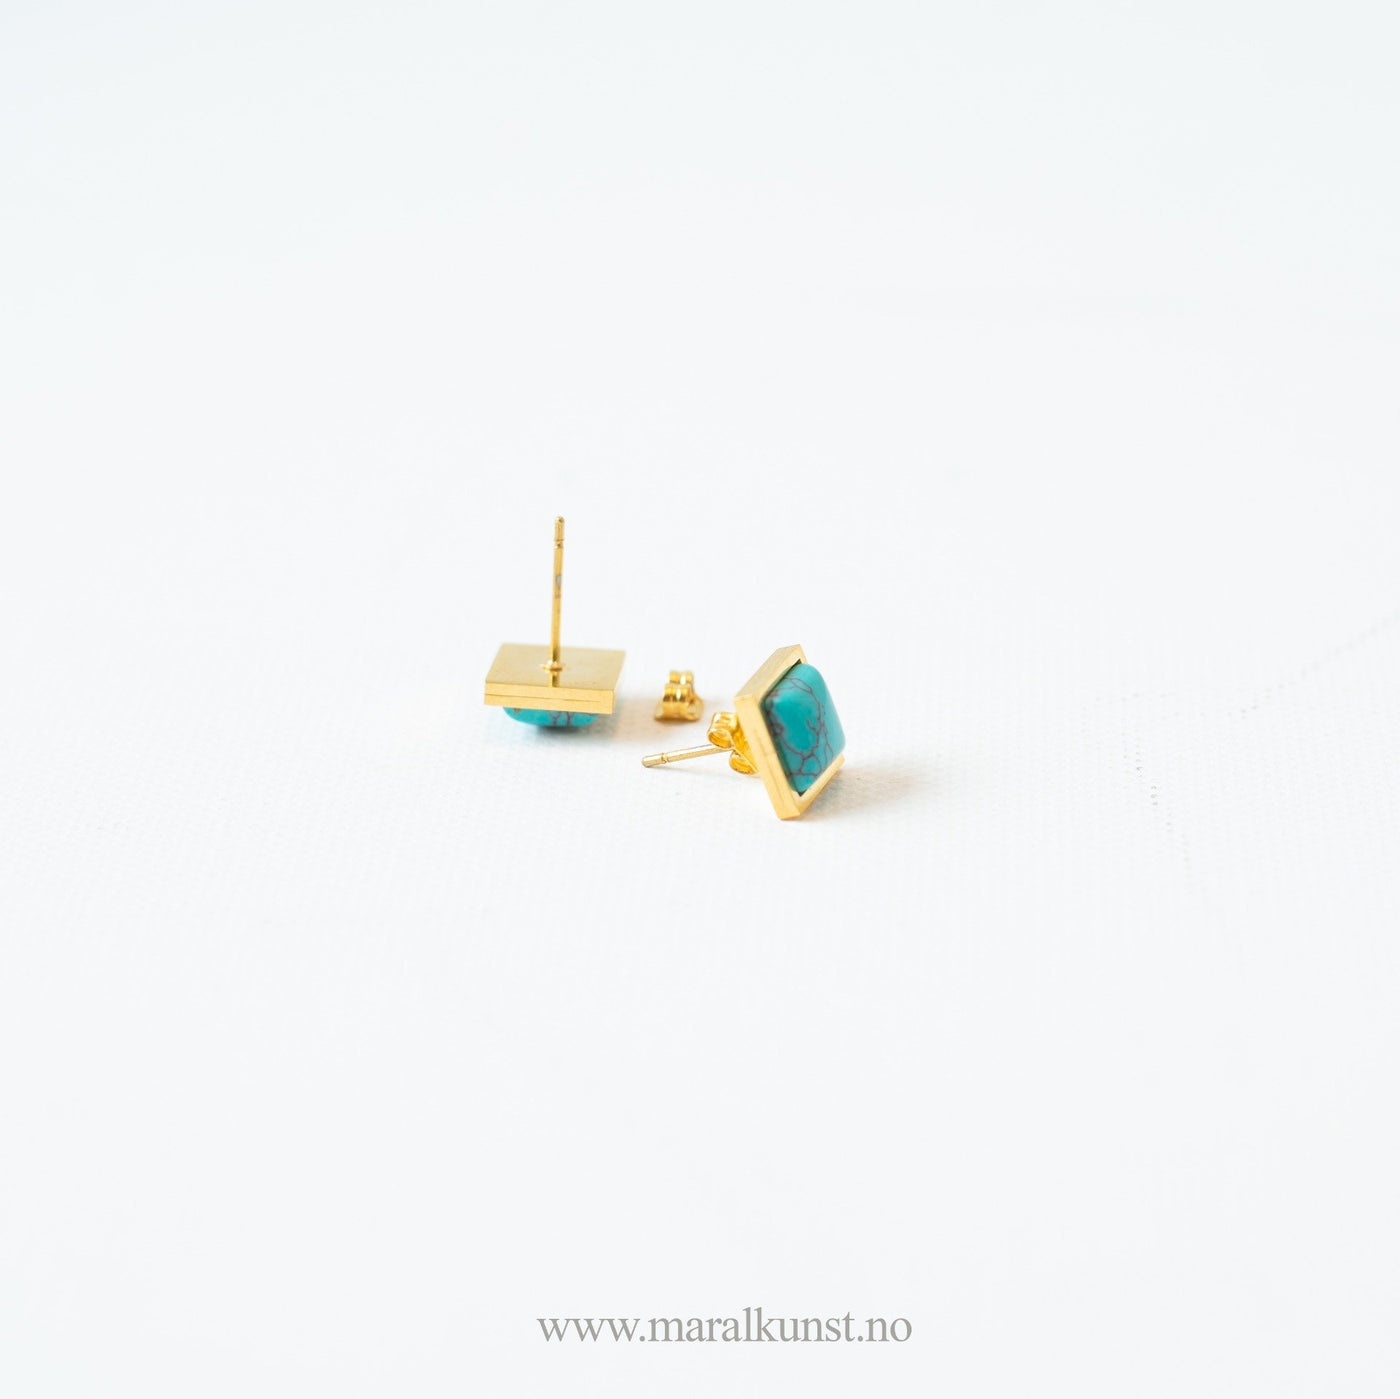 Gold Plated Square Cut Turquoise Stud Earrings - Maral Kunst Jewelry